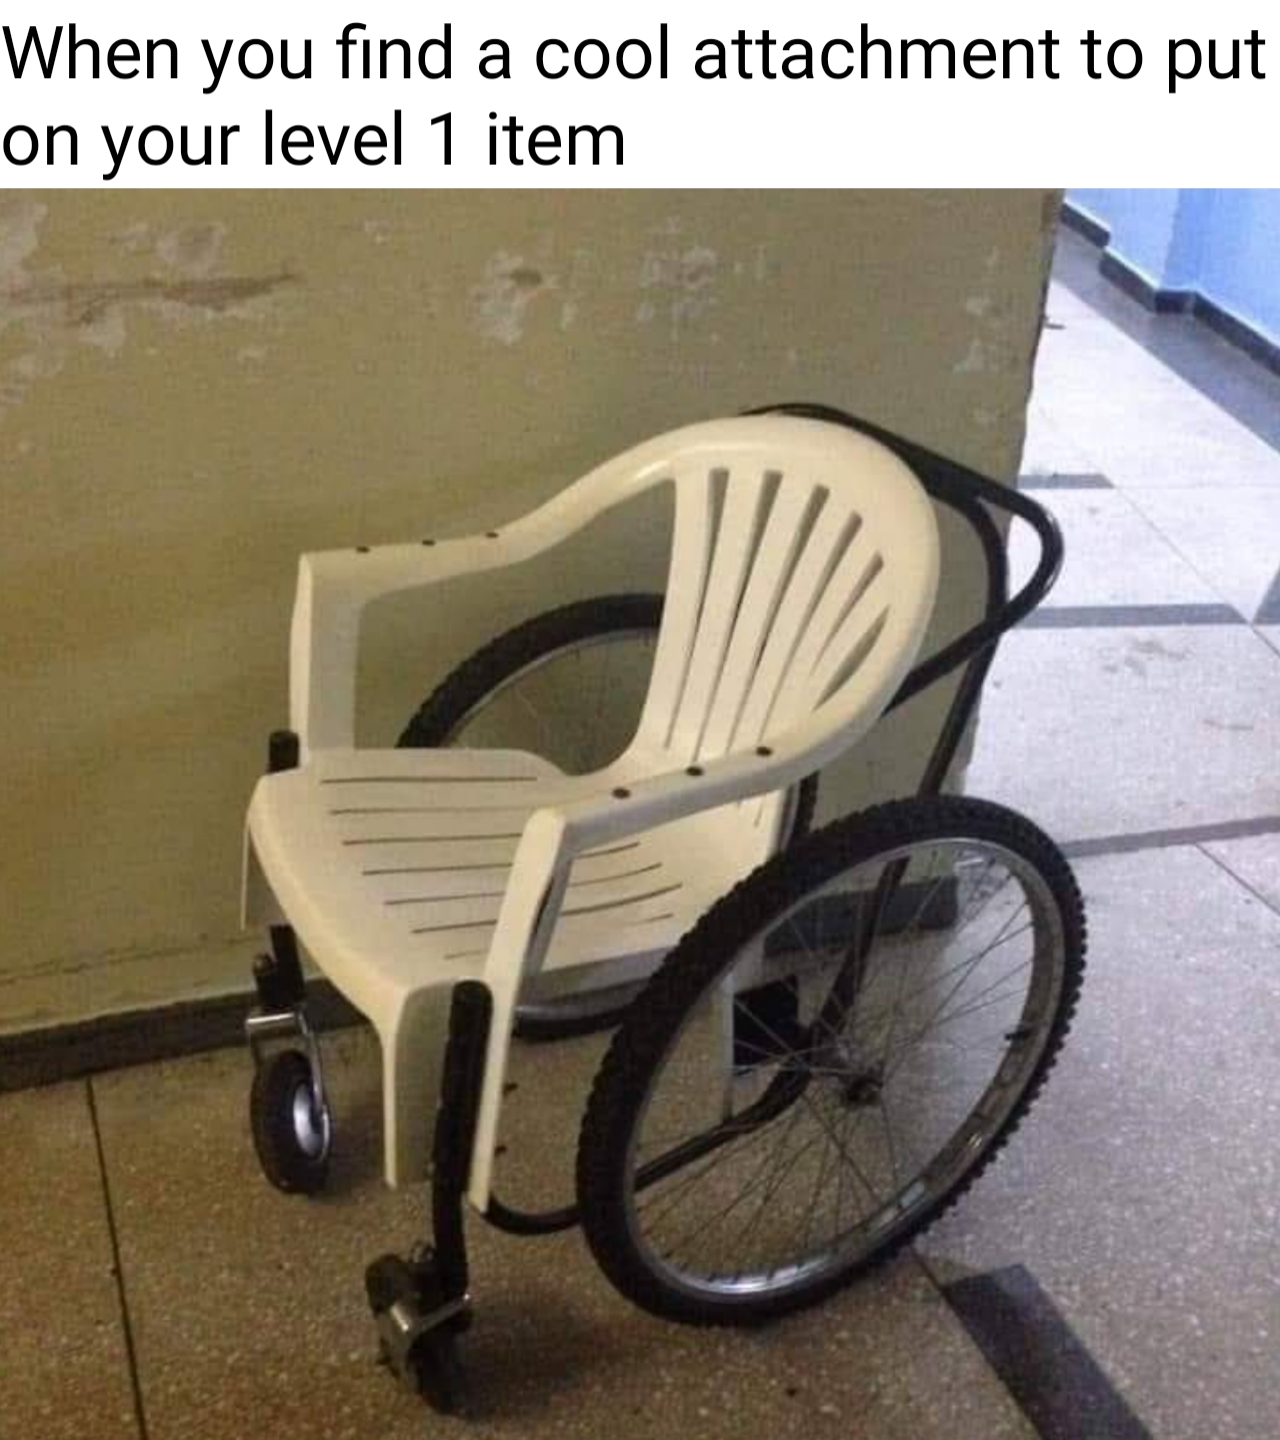 you upgrade your level 1 item - When you find a cool attachment to put on your level 1 item